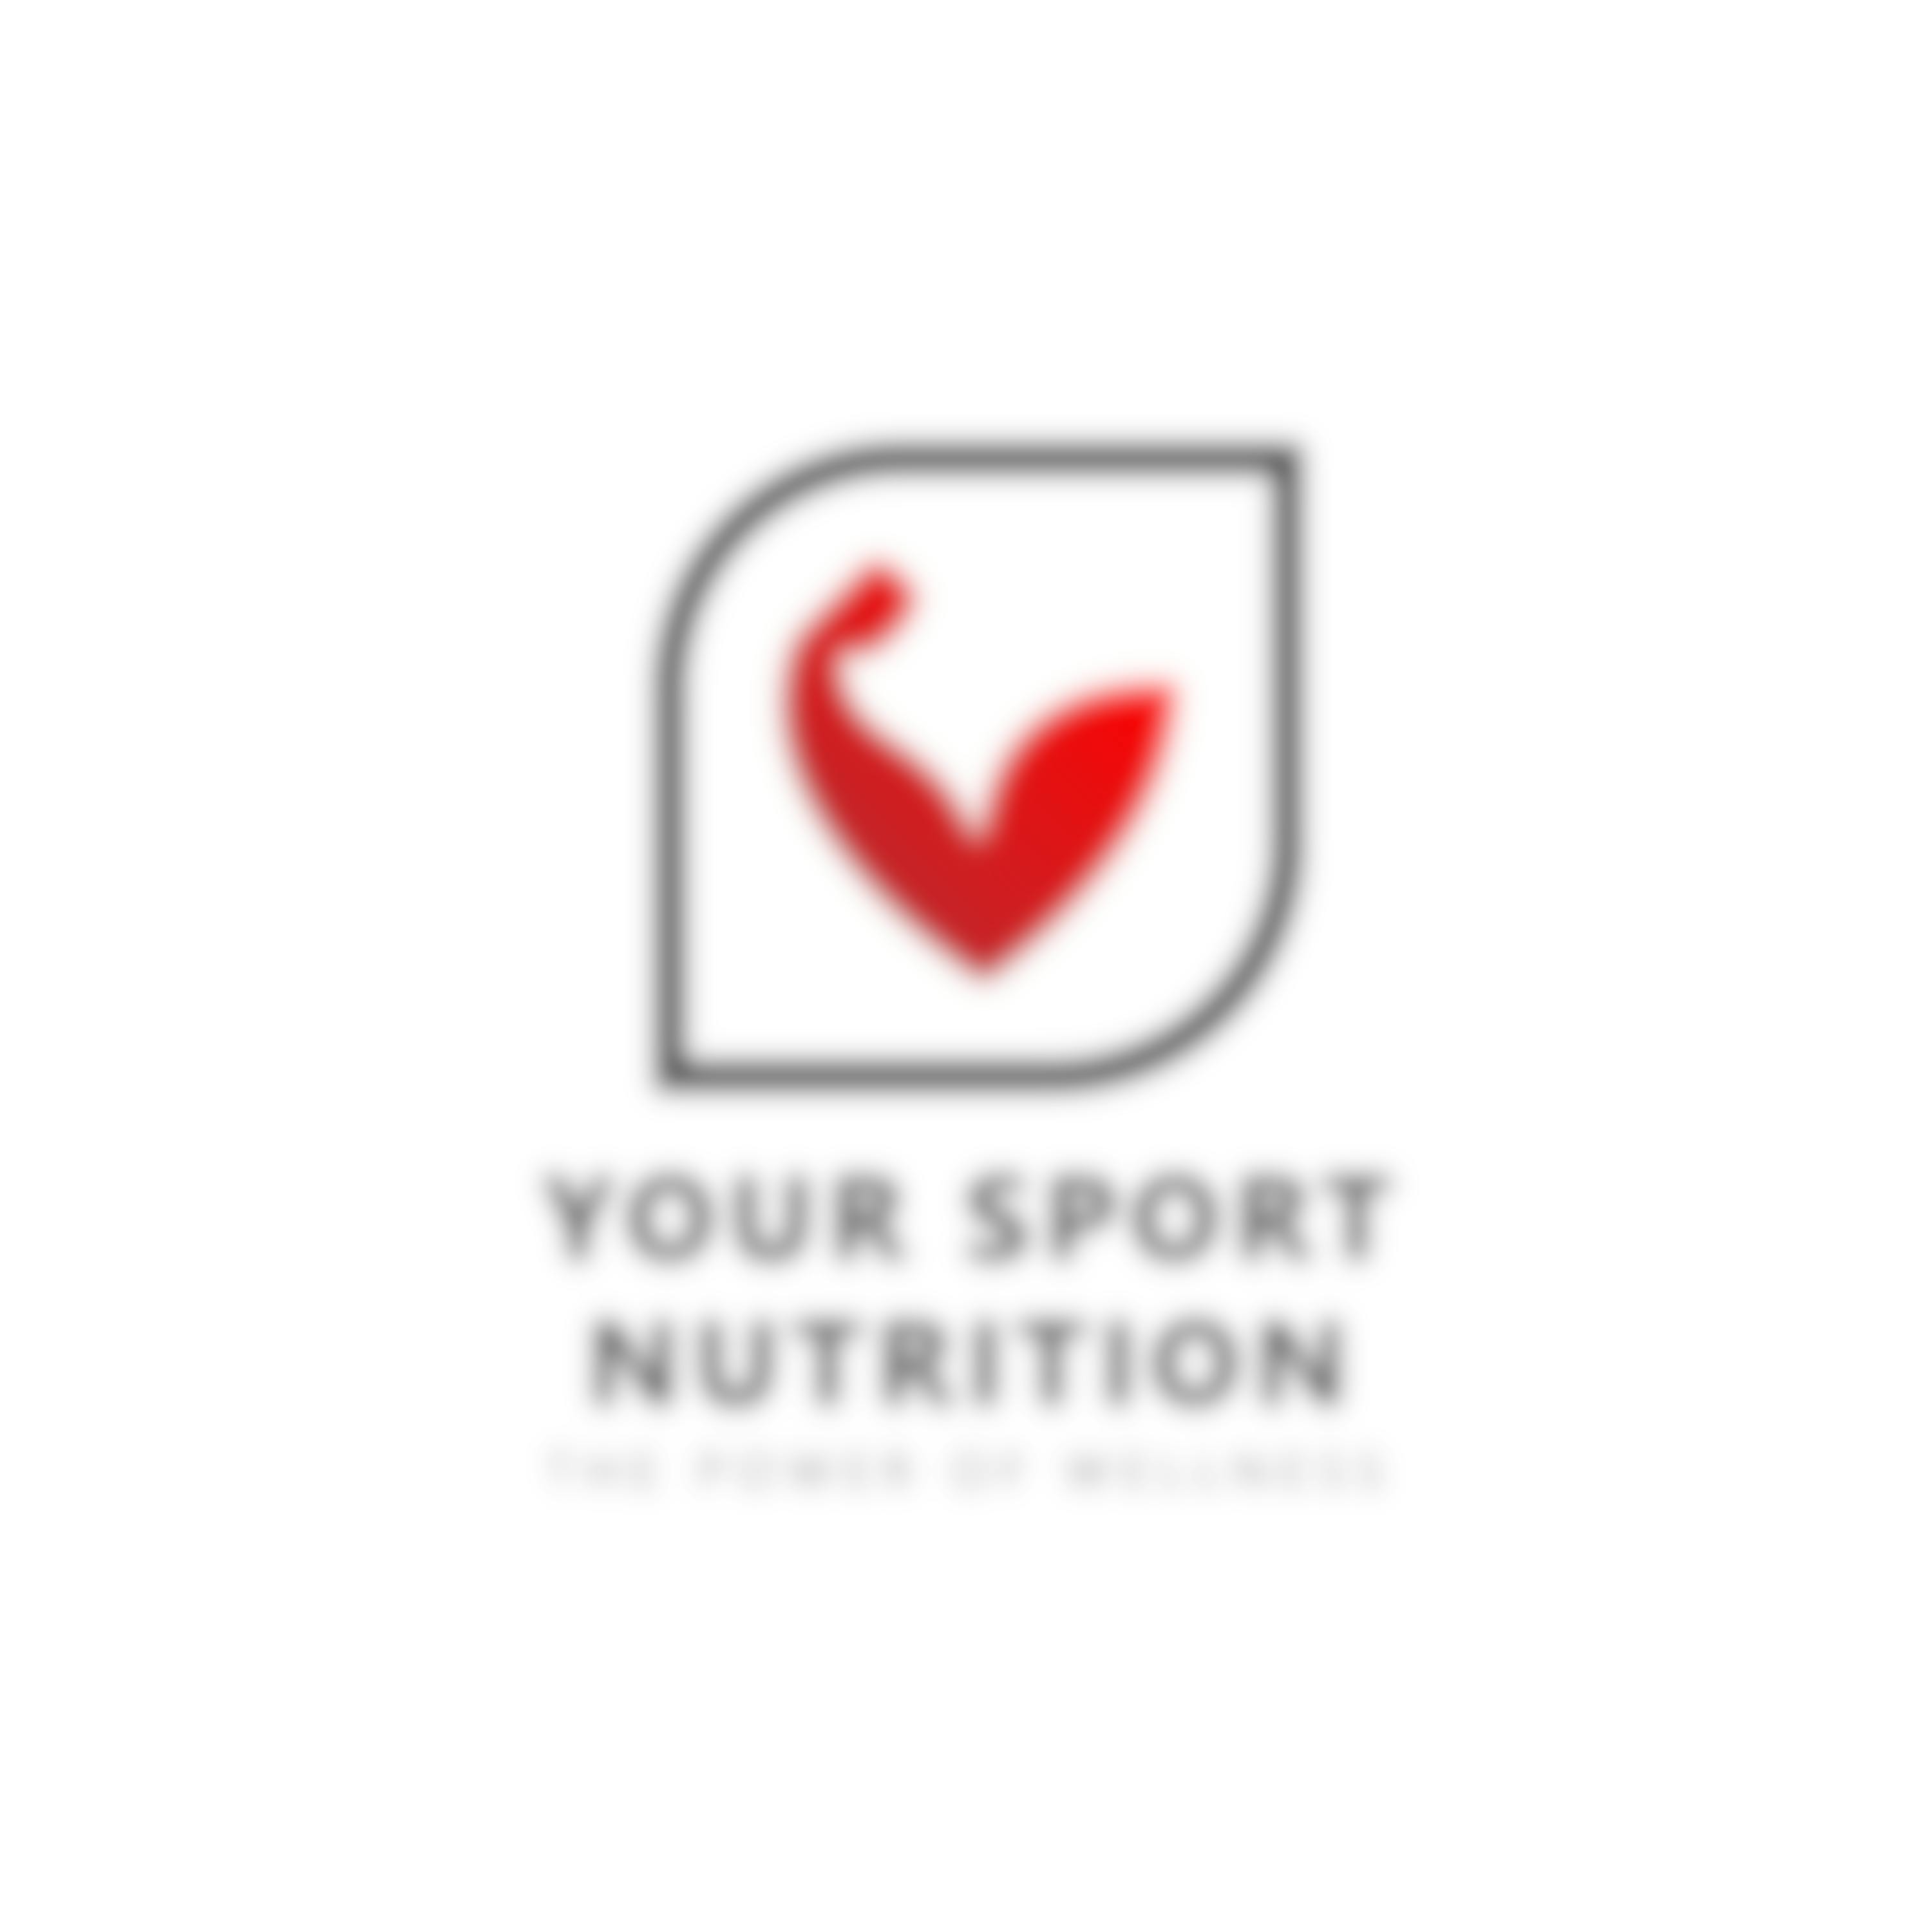 Your sport nutrition 